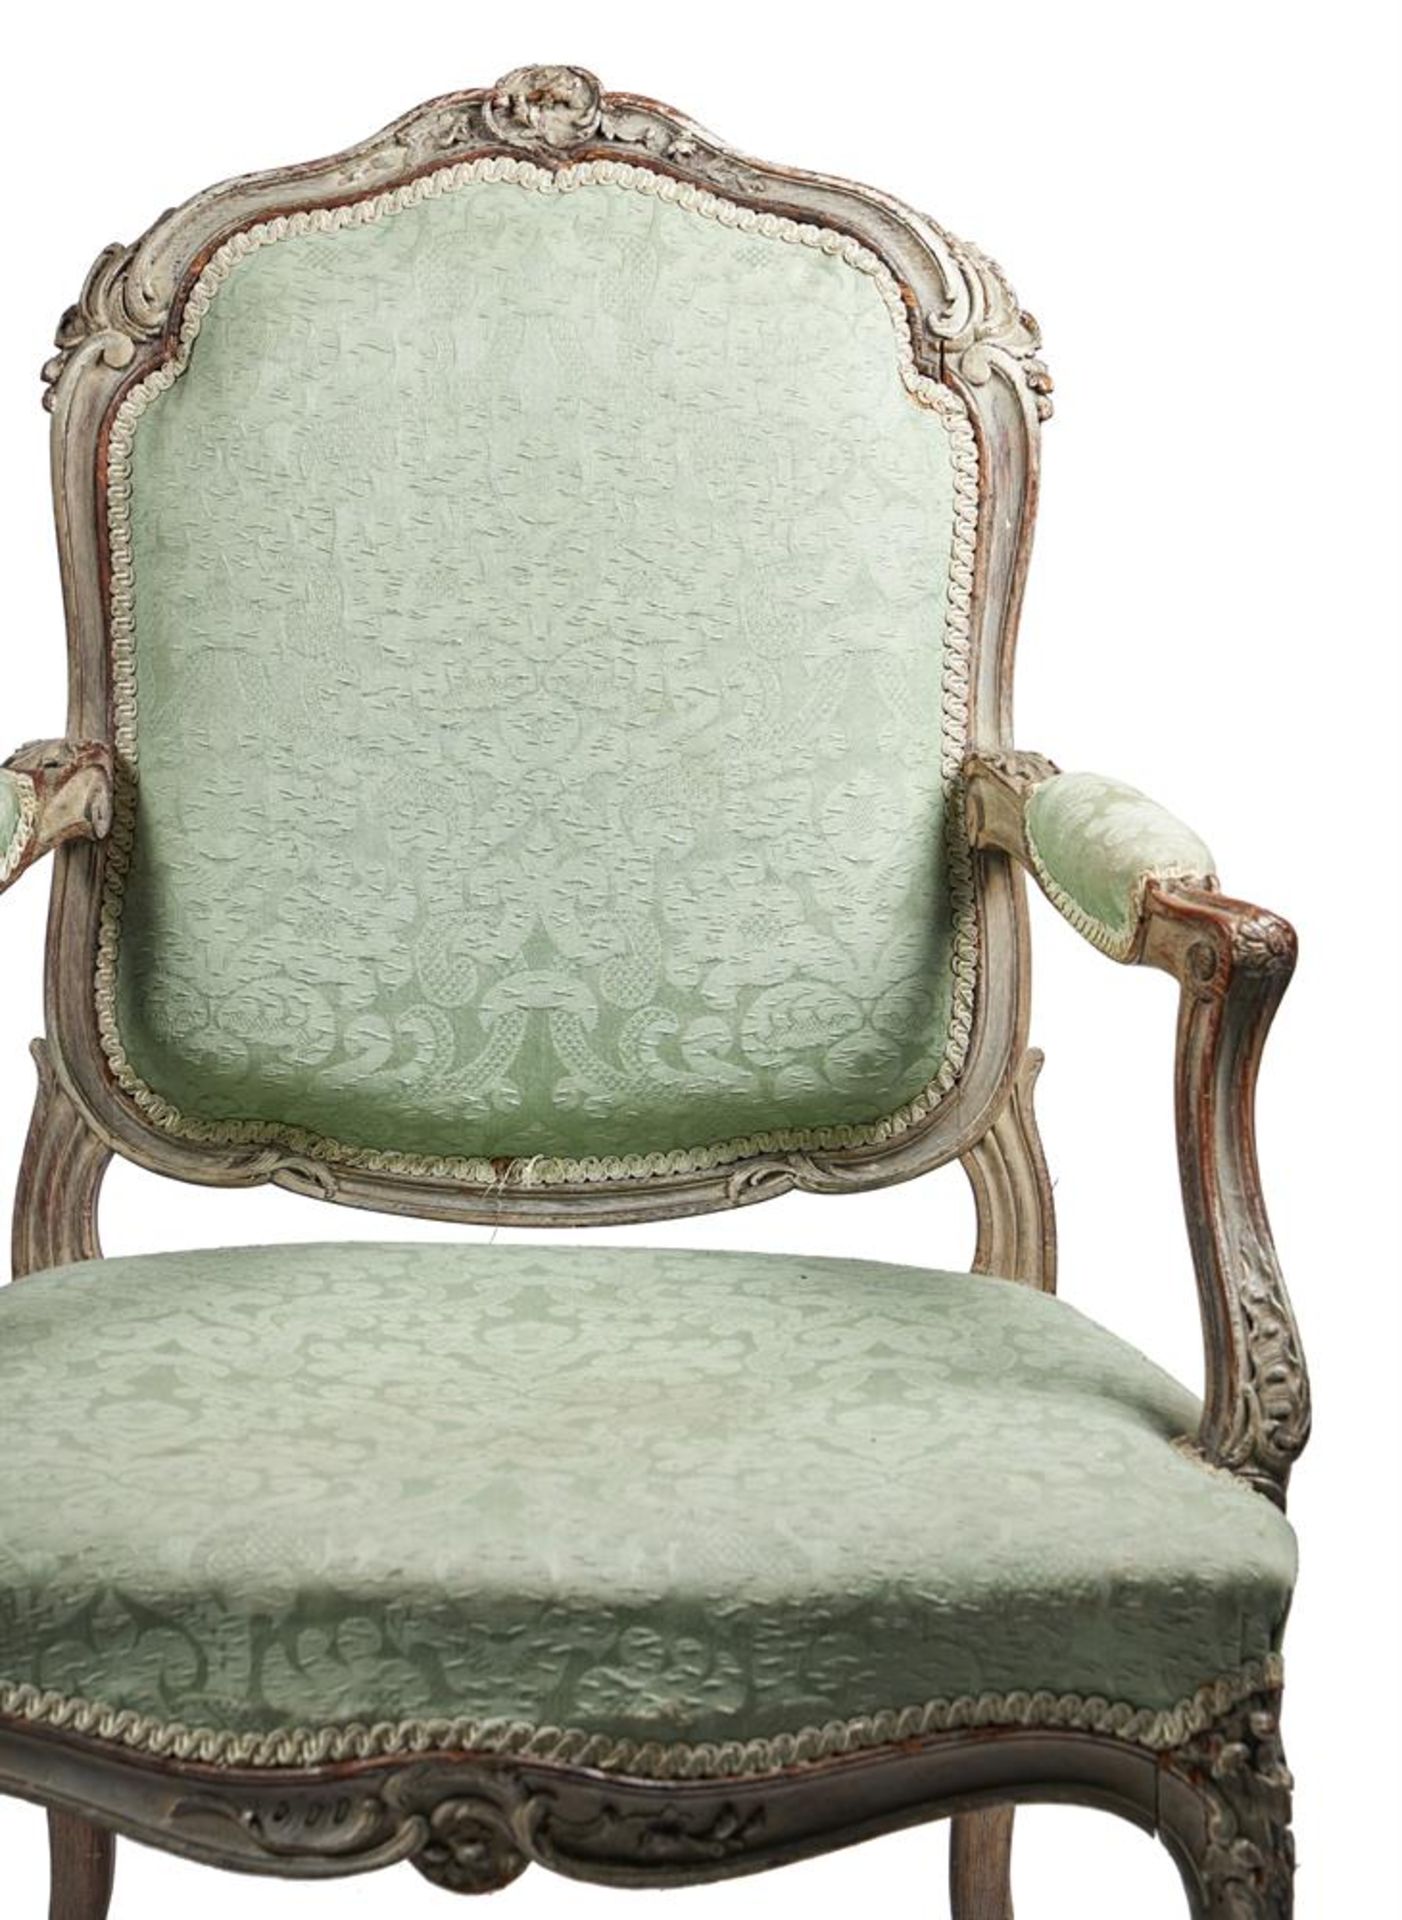 A FRENCH PAINTED OAK ARMCHAIR IN LOUIS XV STYLE, 19TH CENTURY - Image 2 of 2